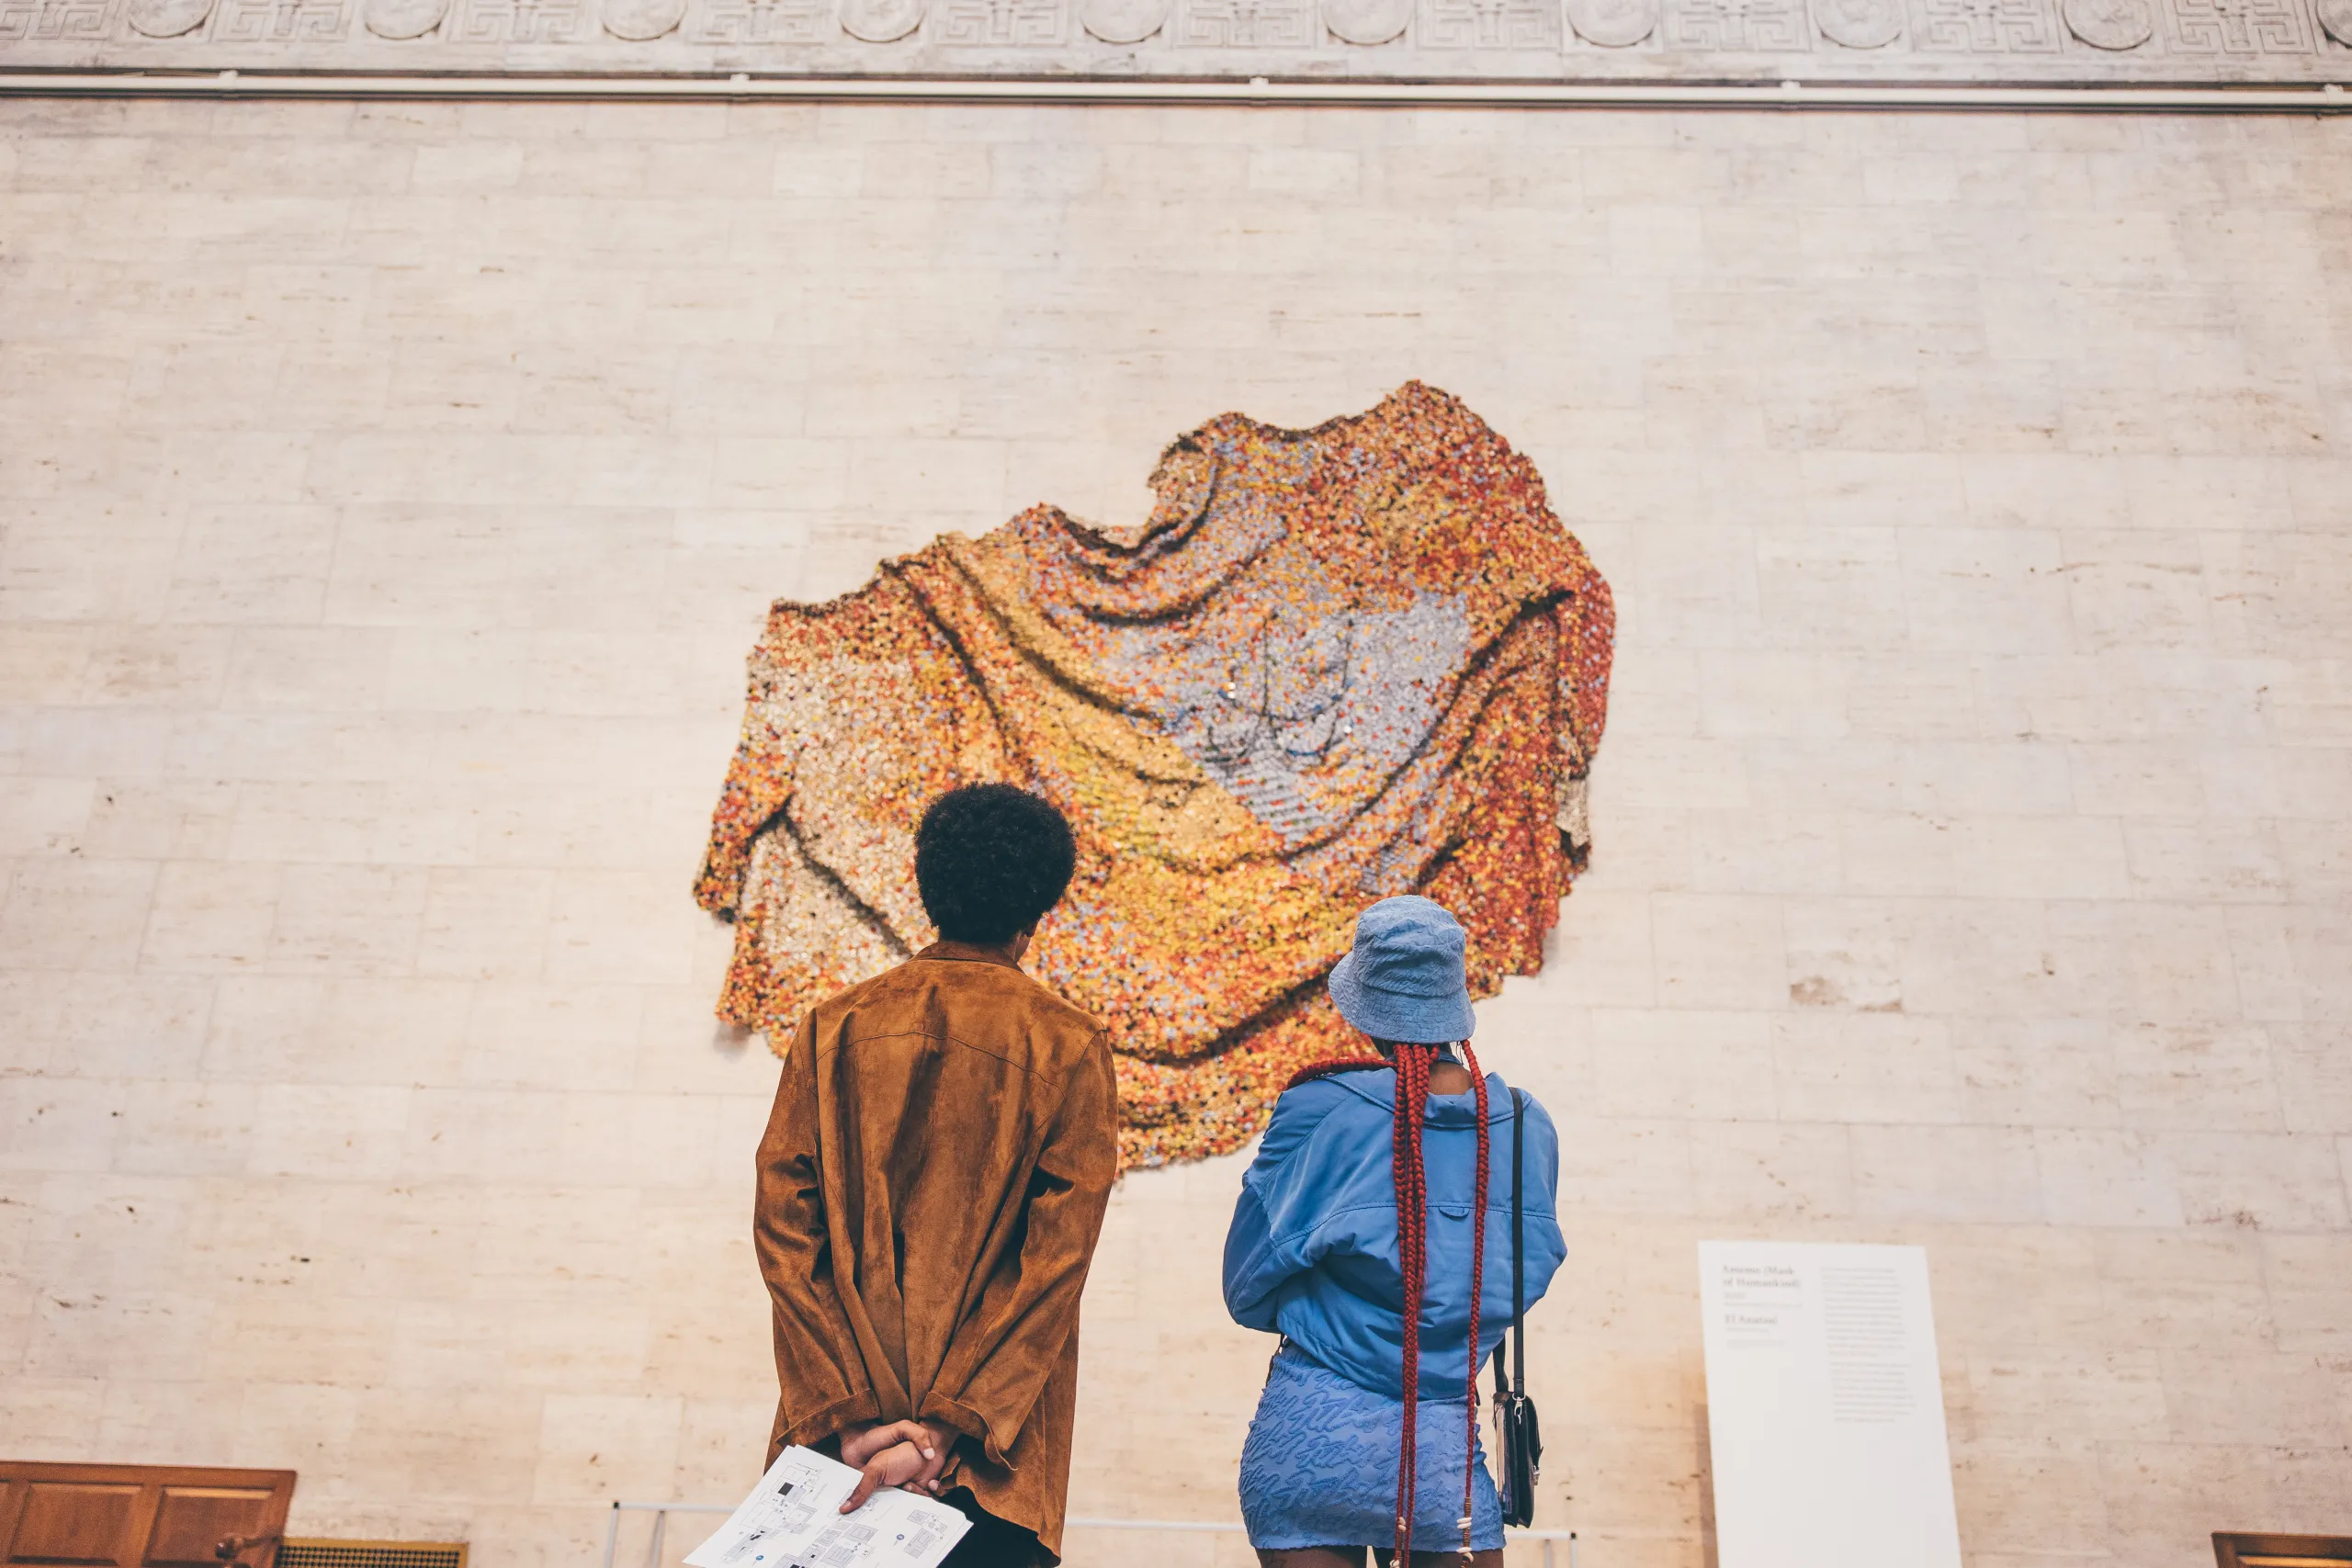 Two visitors stare at the large El Anatsui installation in the Great Hall of the DIA